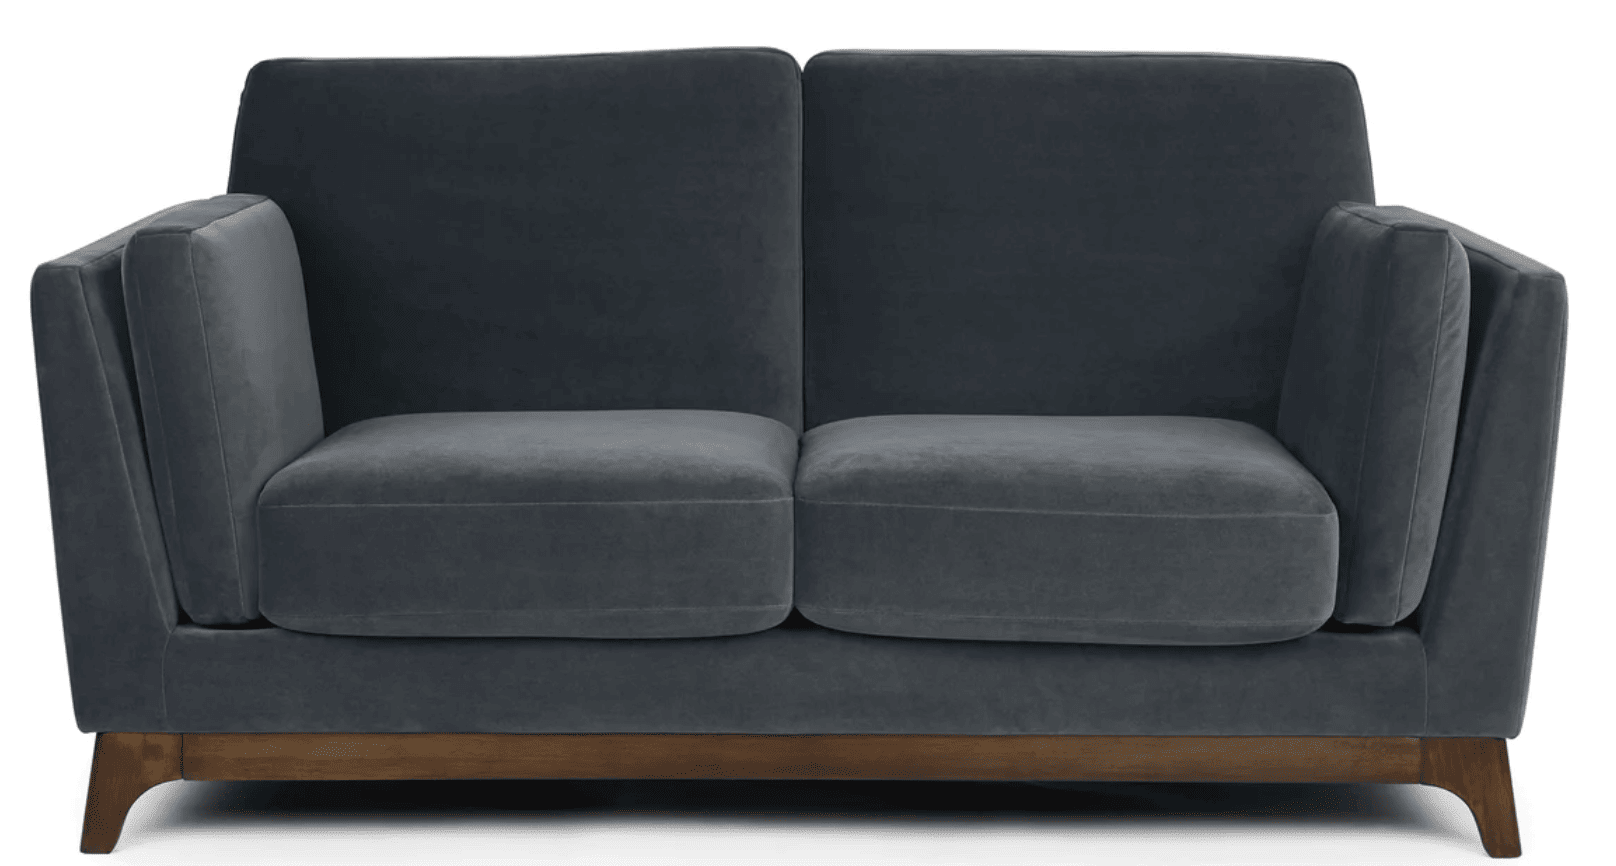 Blue loveseat from Article